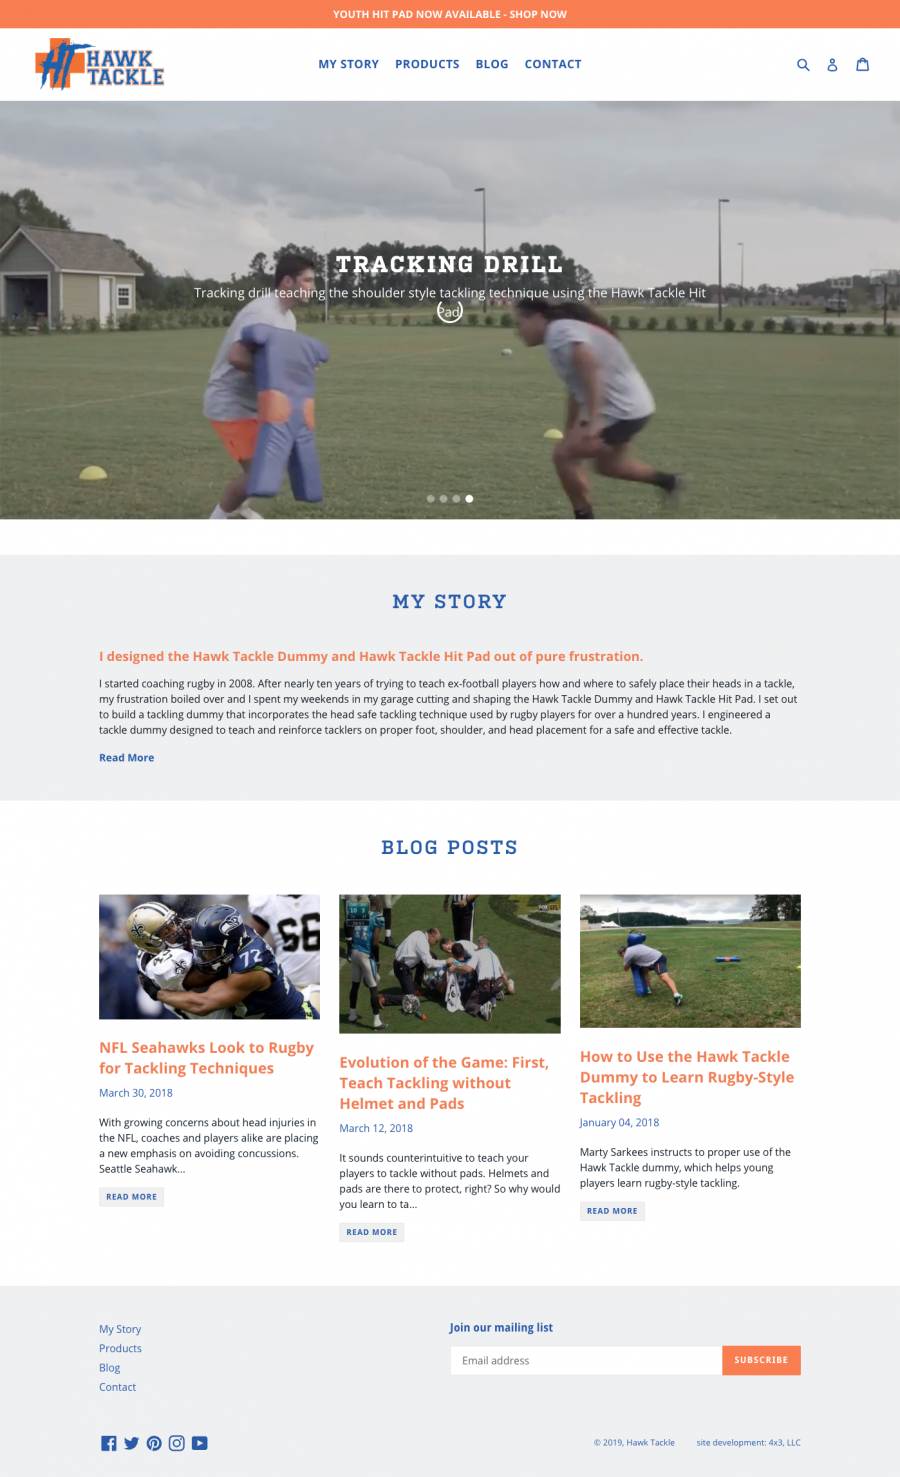 Hawk Tackle Homepage containing an overview of brand message